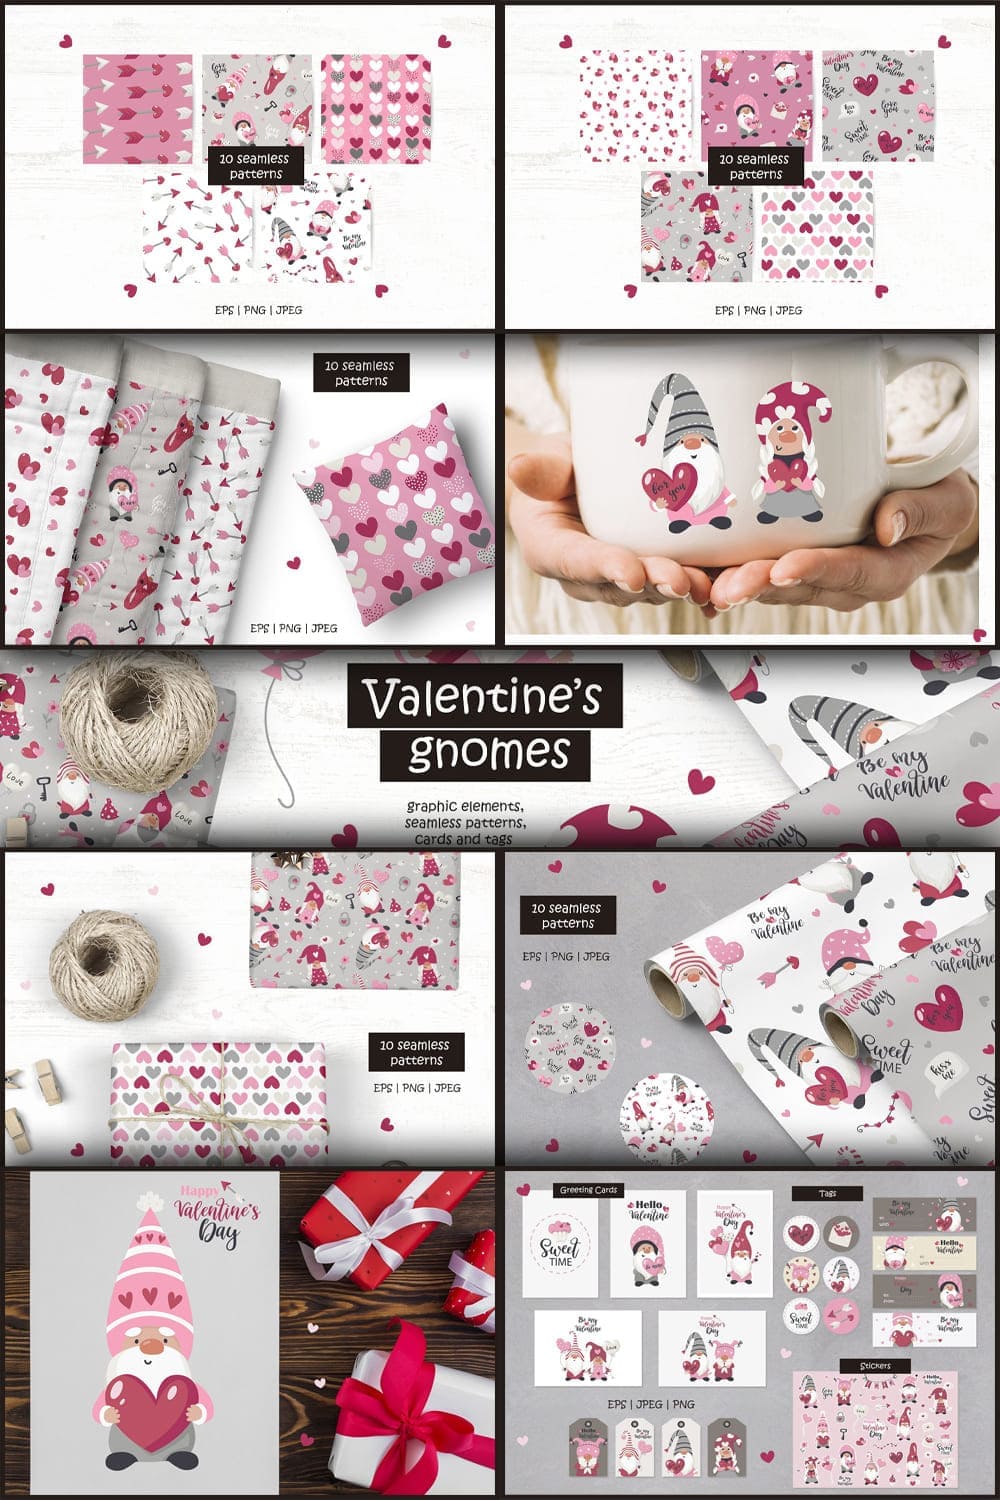 Nine images of Valentine's gnomes in pink on merchandise and wrapping paper in a Pinterest picture.